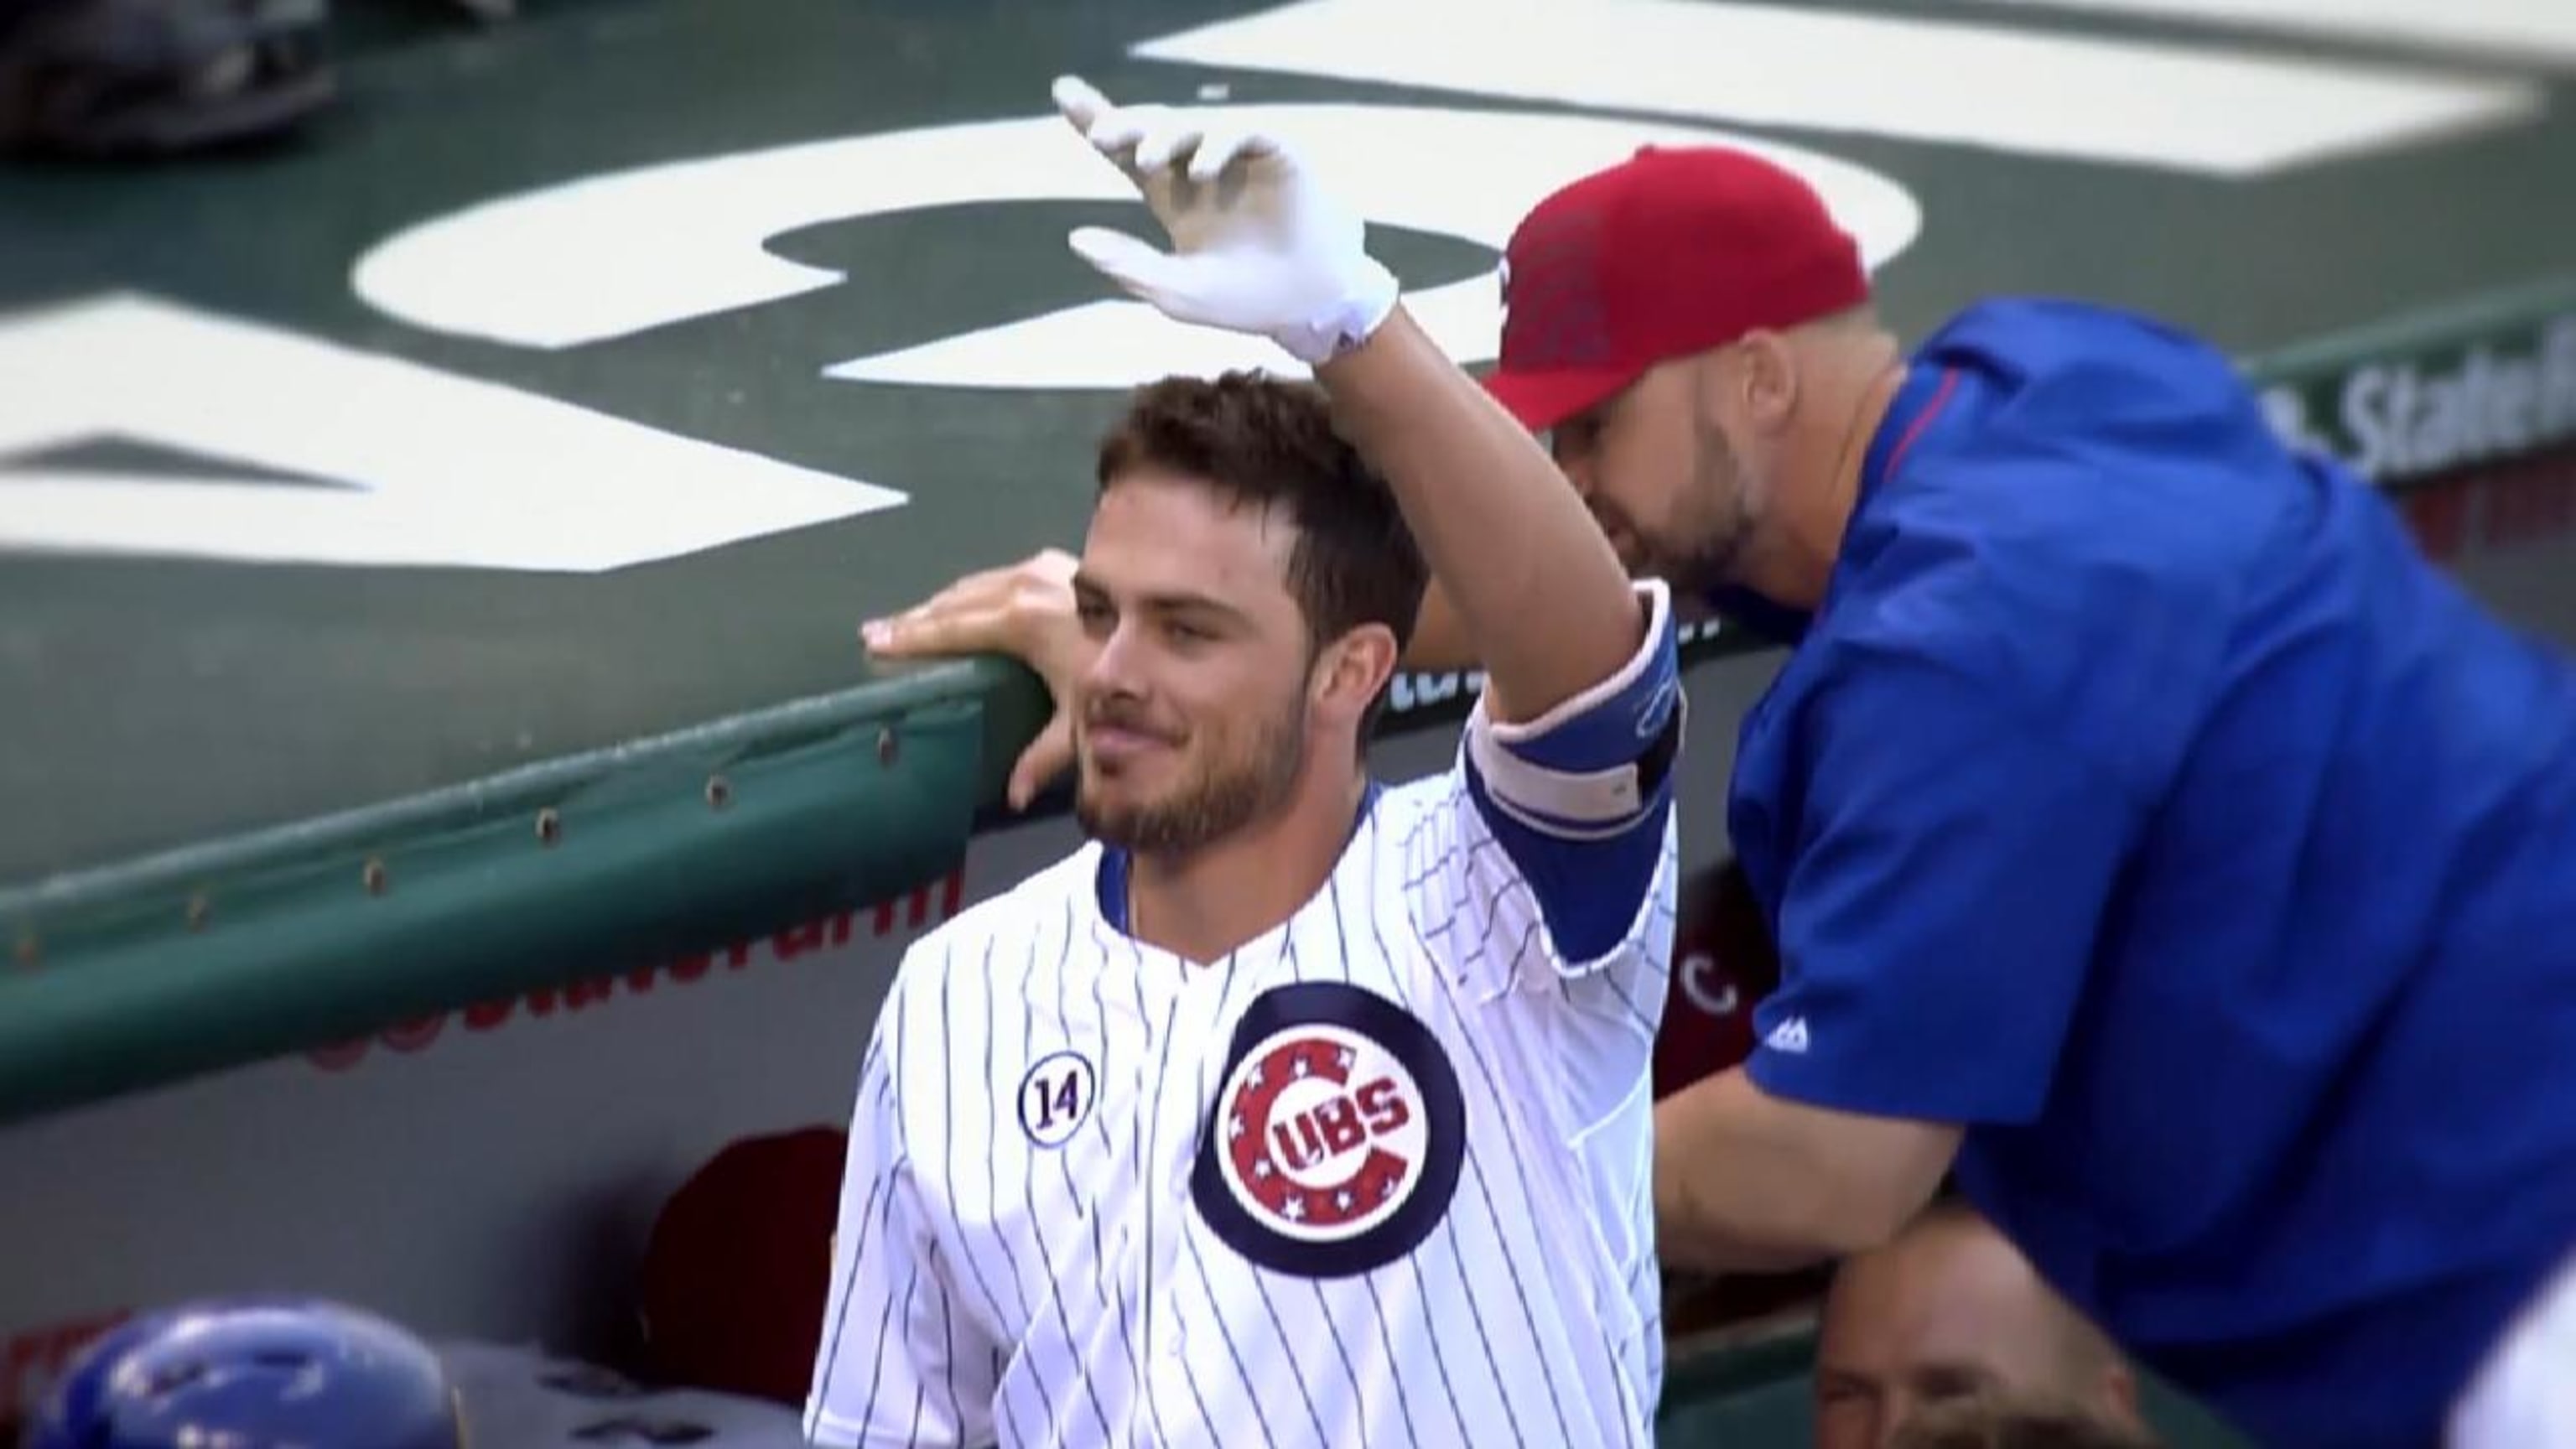 Kris Bryant loves Pirates uniforms more than his own Cubs jersey